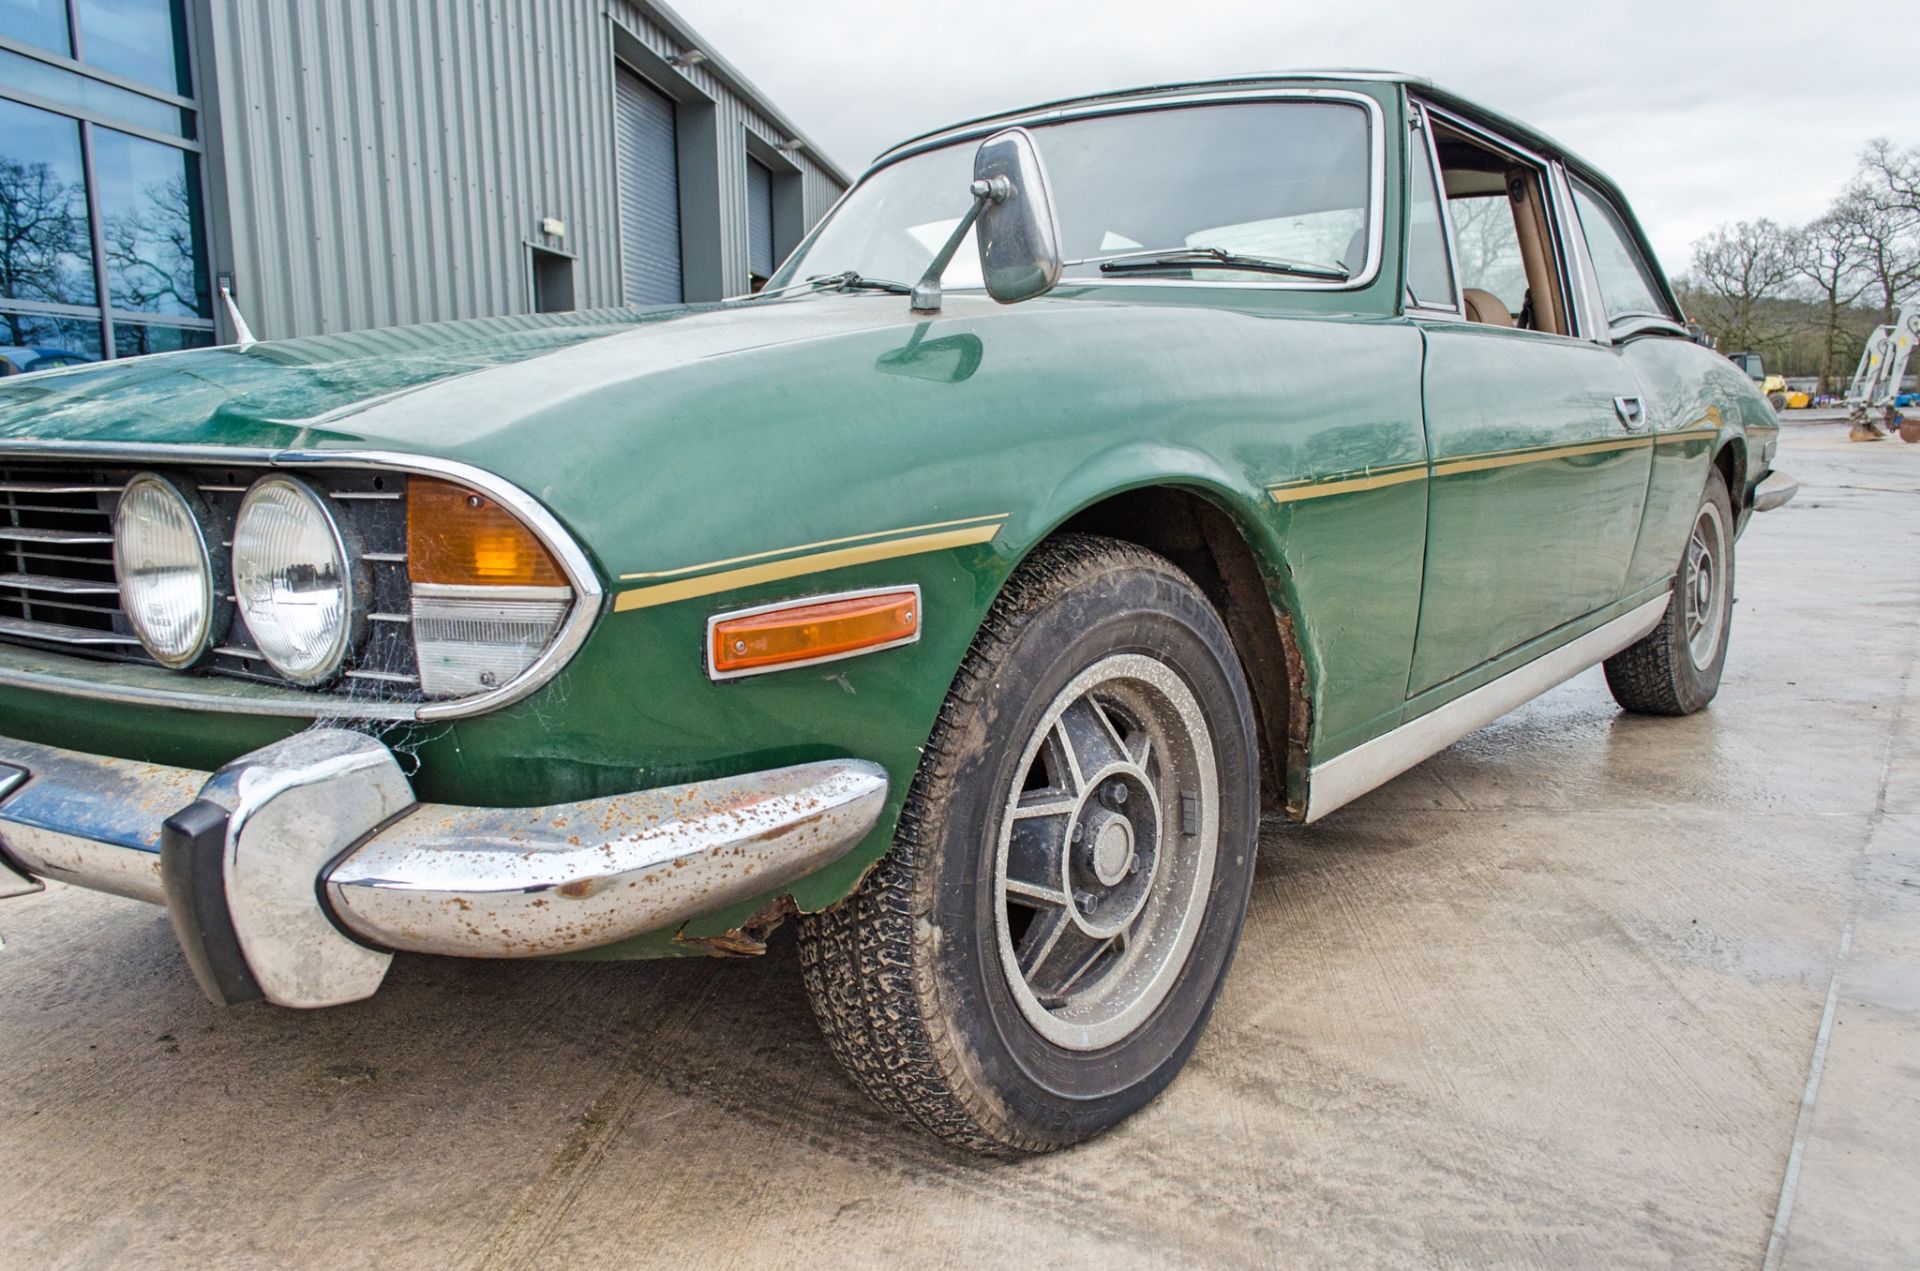 1978 Triumph Stag 3 litre manual 2 door convertible Barn Find - Image 17 of 57